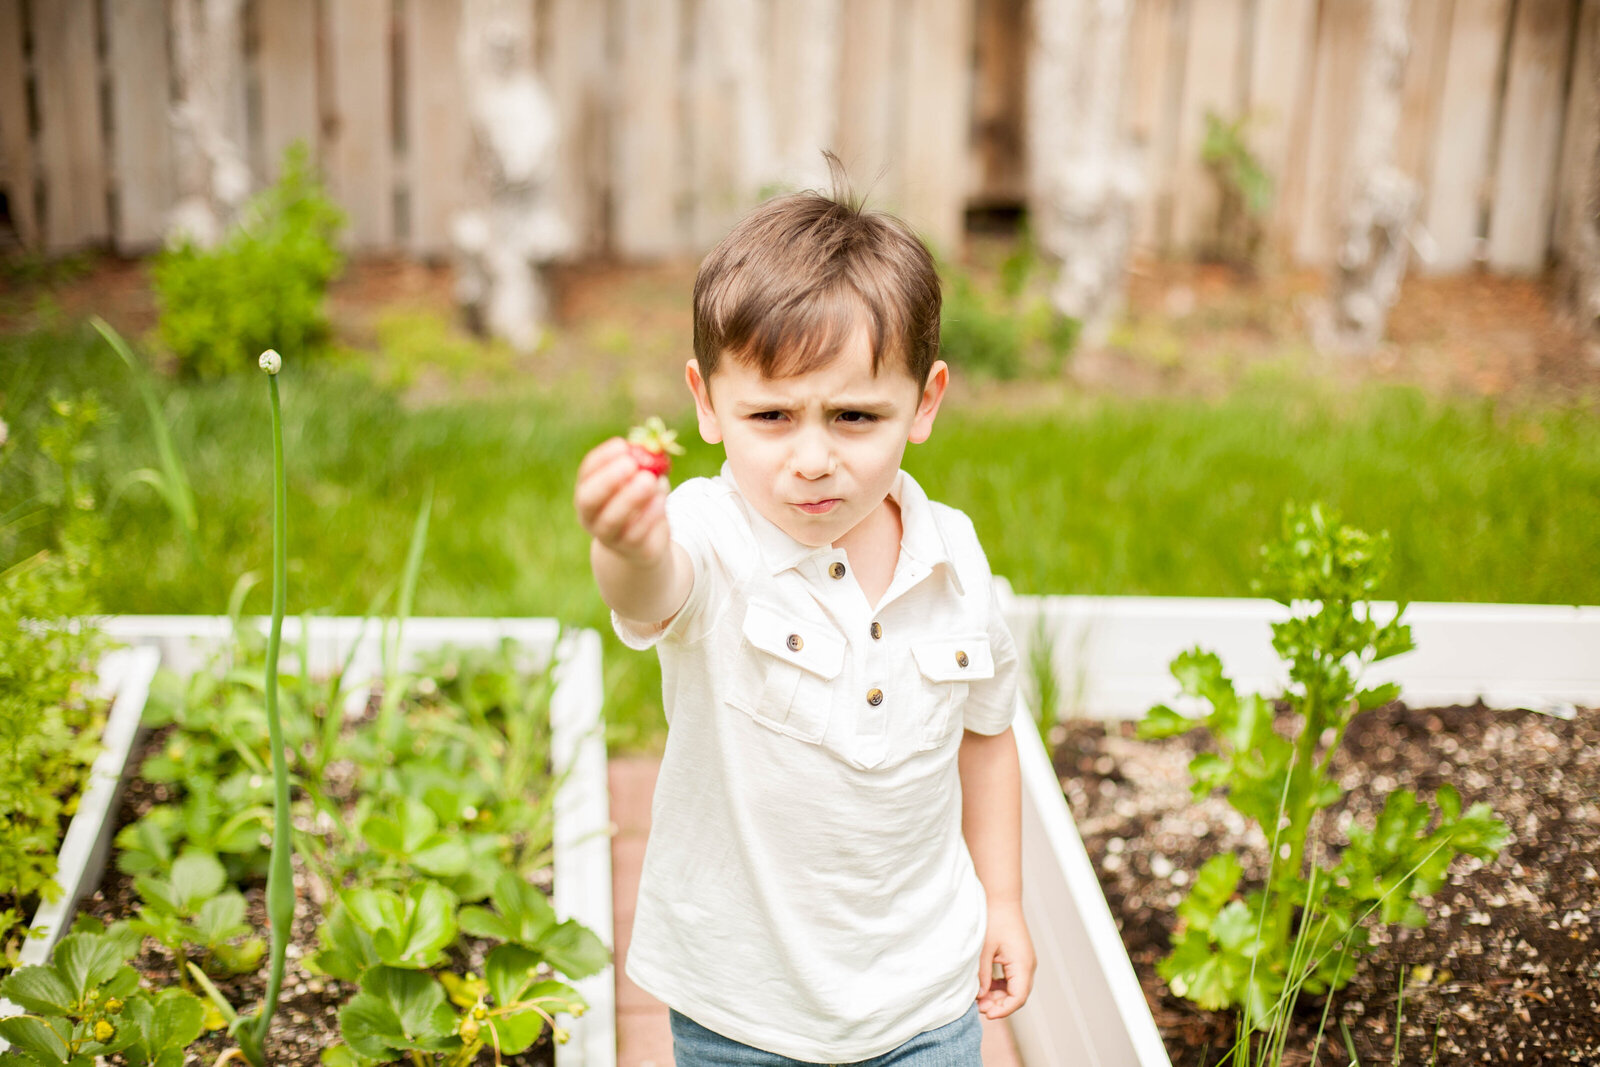 A little boy holding a berry standing in the garden.